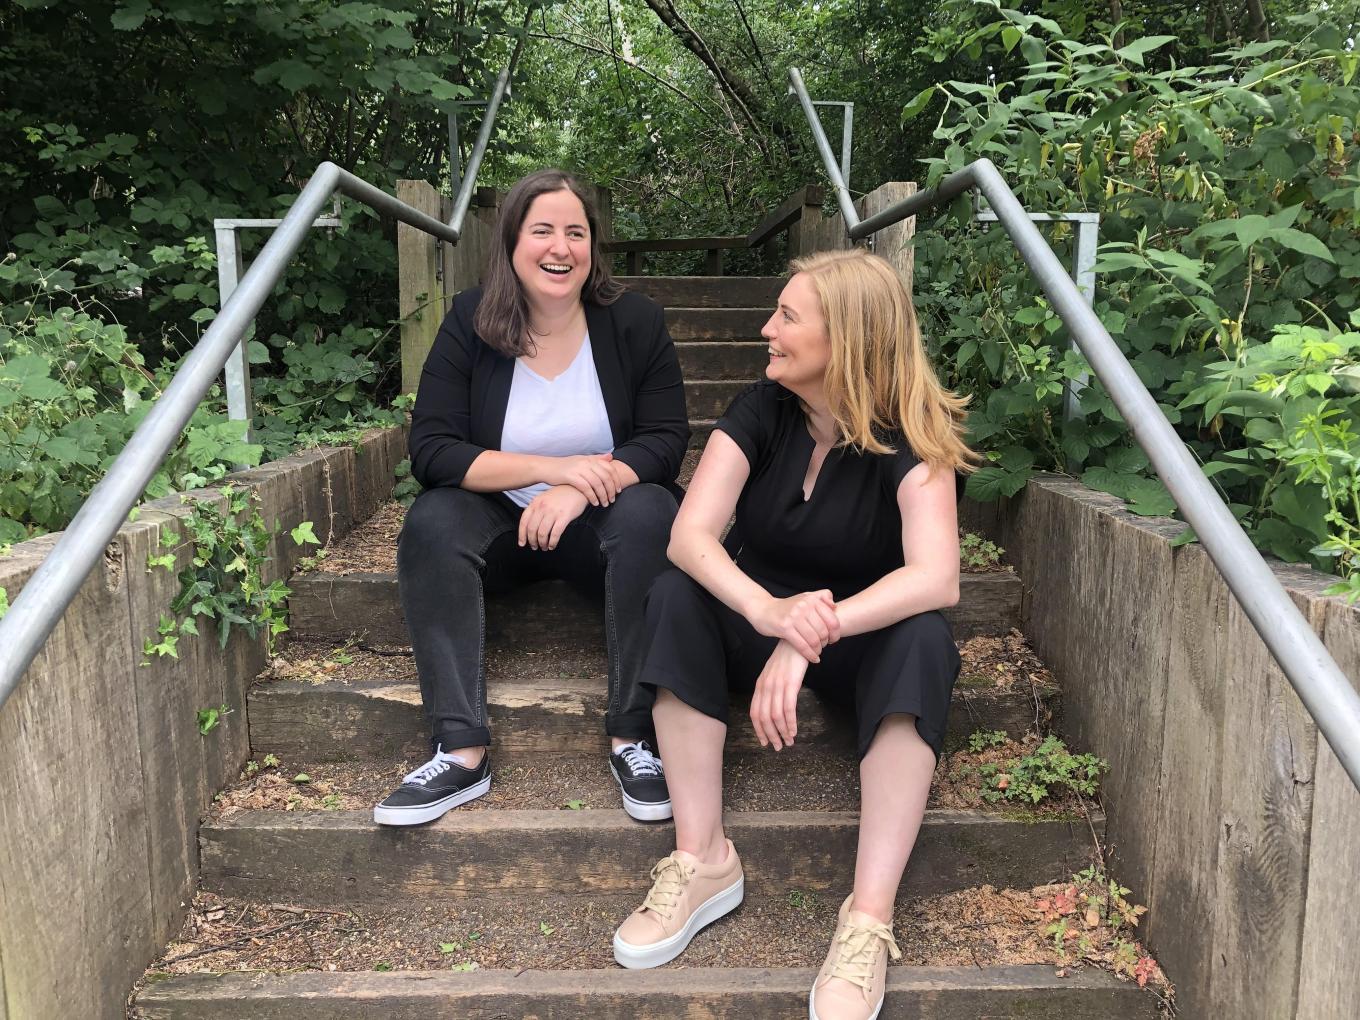 Organise founders founders Bex Hay and Nat Whalley sitting on some outdoor steps